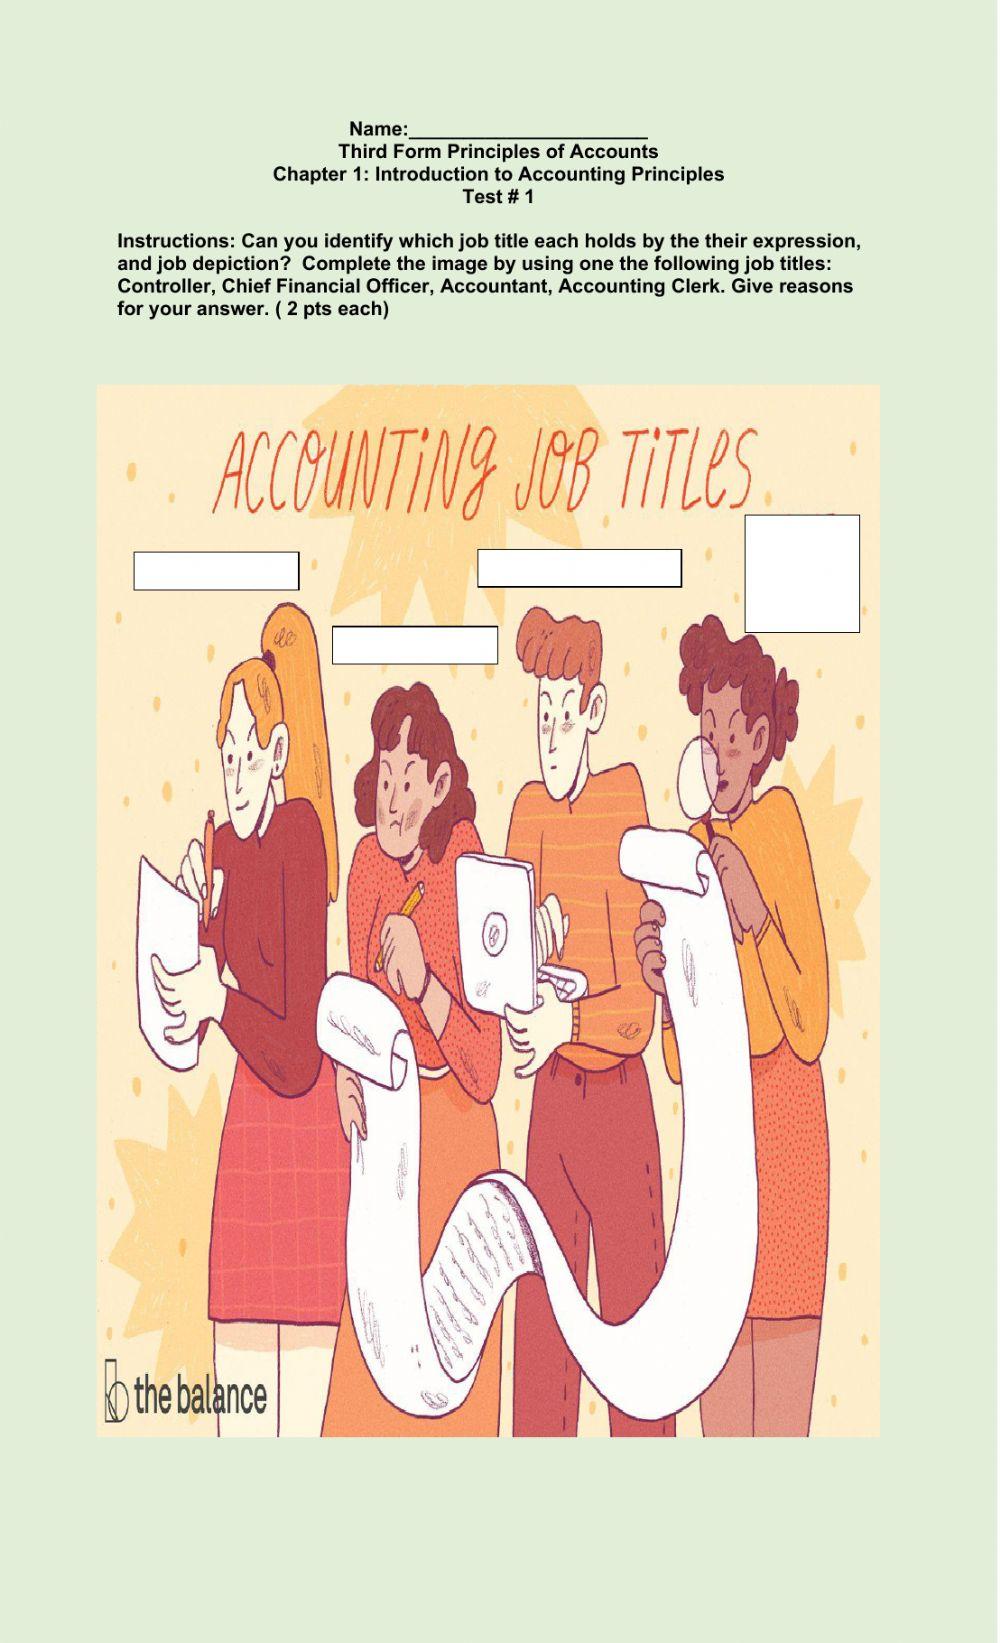 Introduction to Accounting Principles